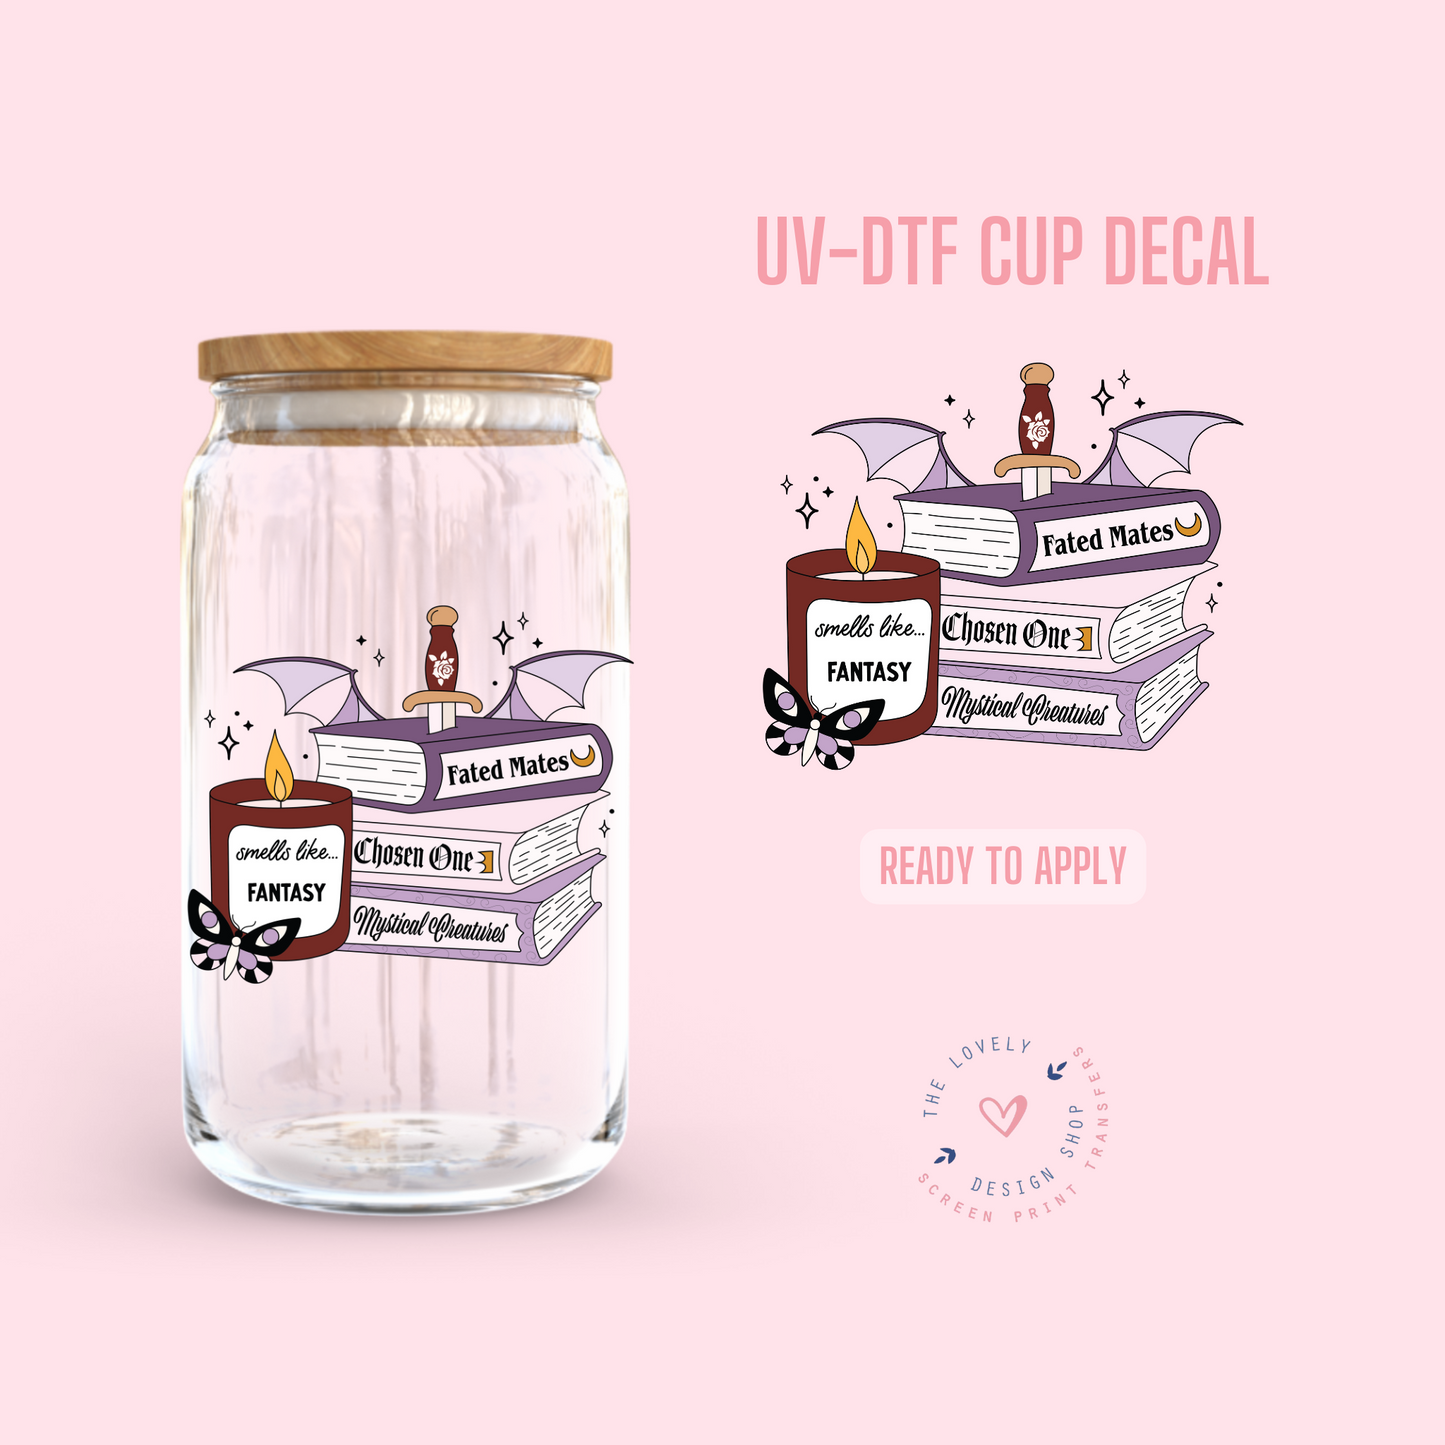 Smells Like Fantasy - UV DTF Cup Decal (Ready to Ship) Apr 29